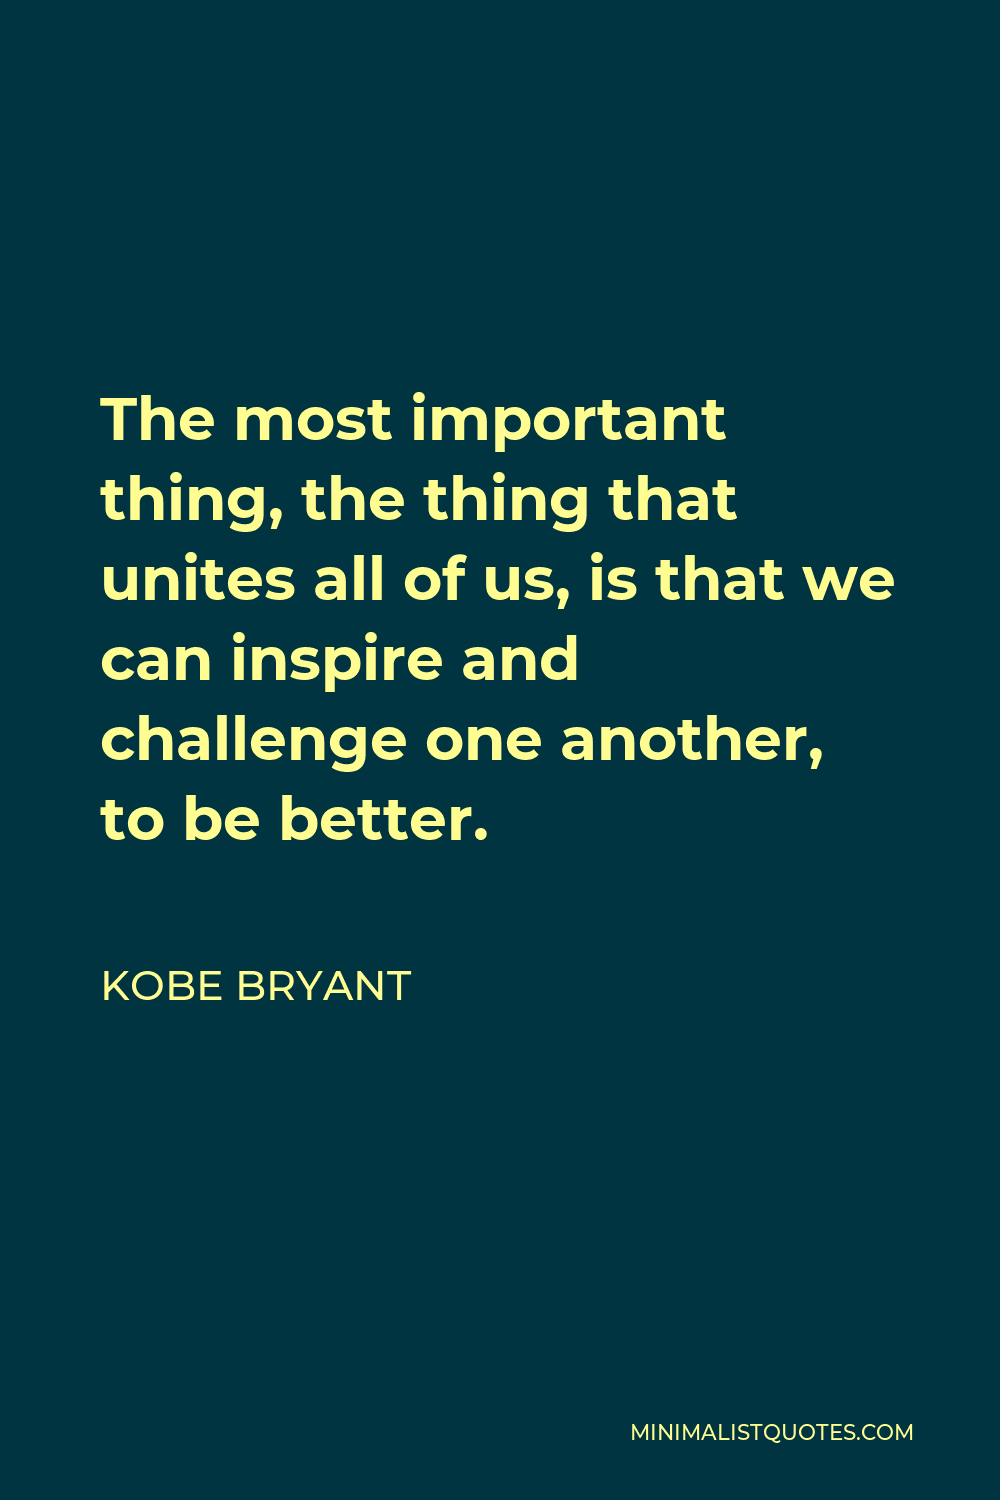 Kobe Bryant Quote - The most important thing, the thing that unites all of us, is that we can inspire and challenge one another, to be better.